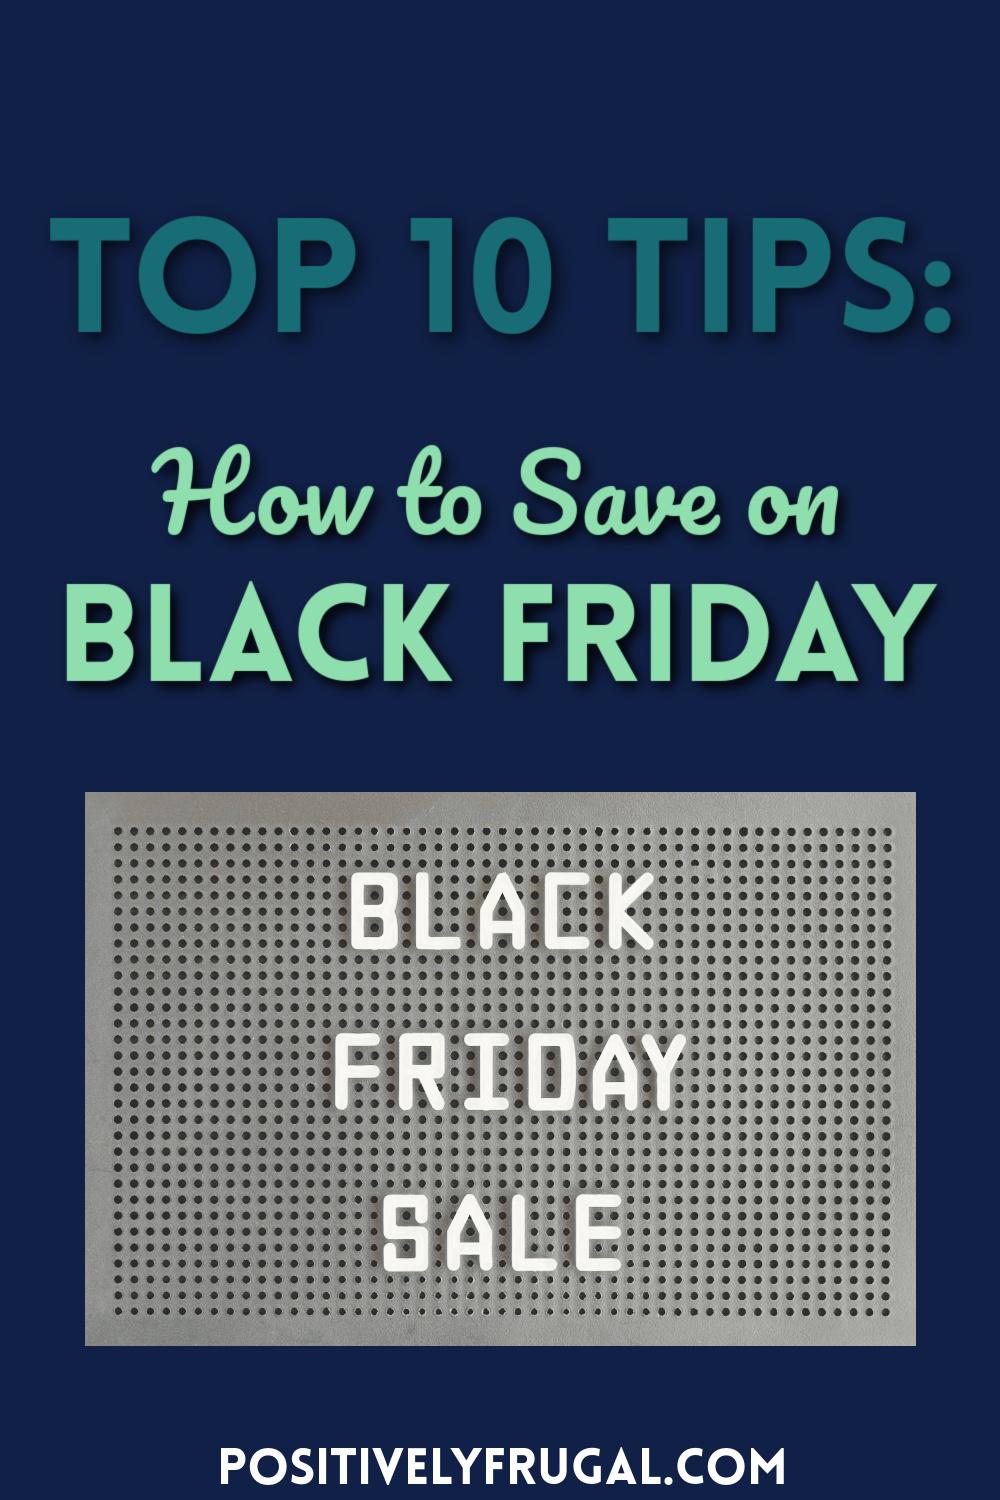 Top 10 Tips How To Save on Black Friday by PositivelyFrugal.com